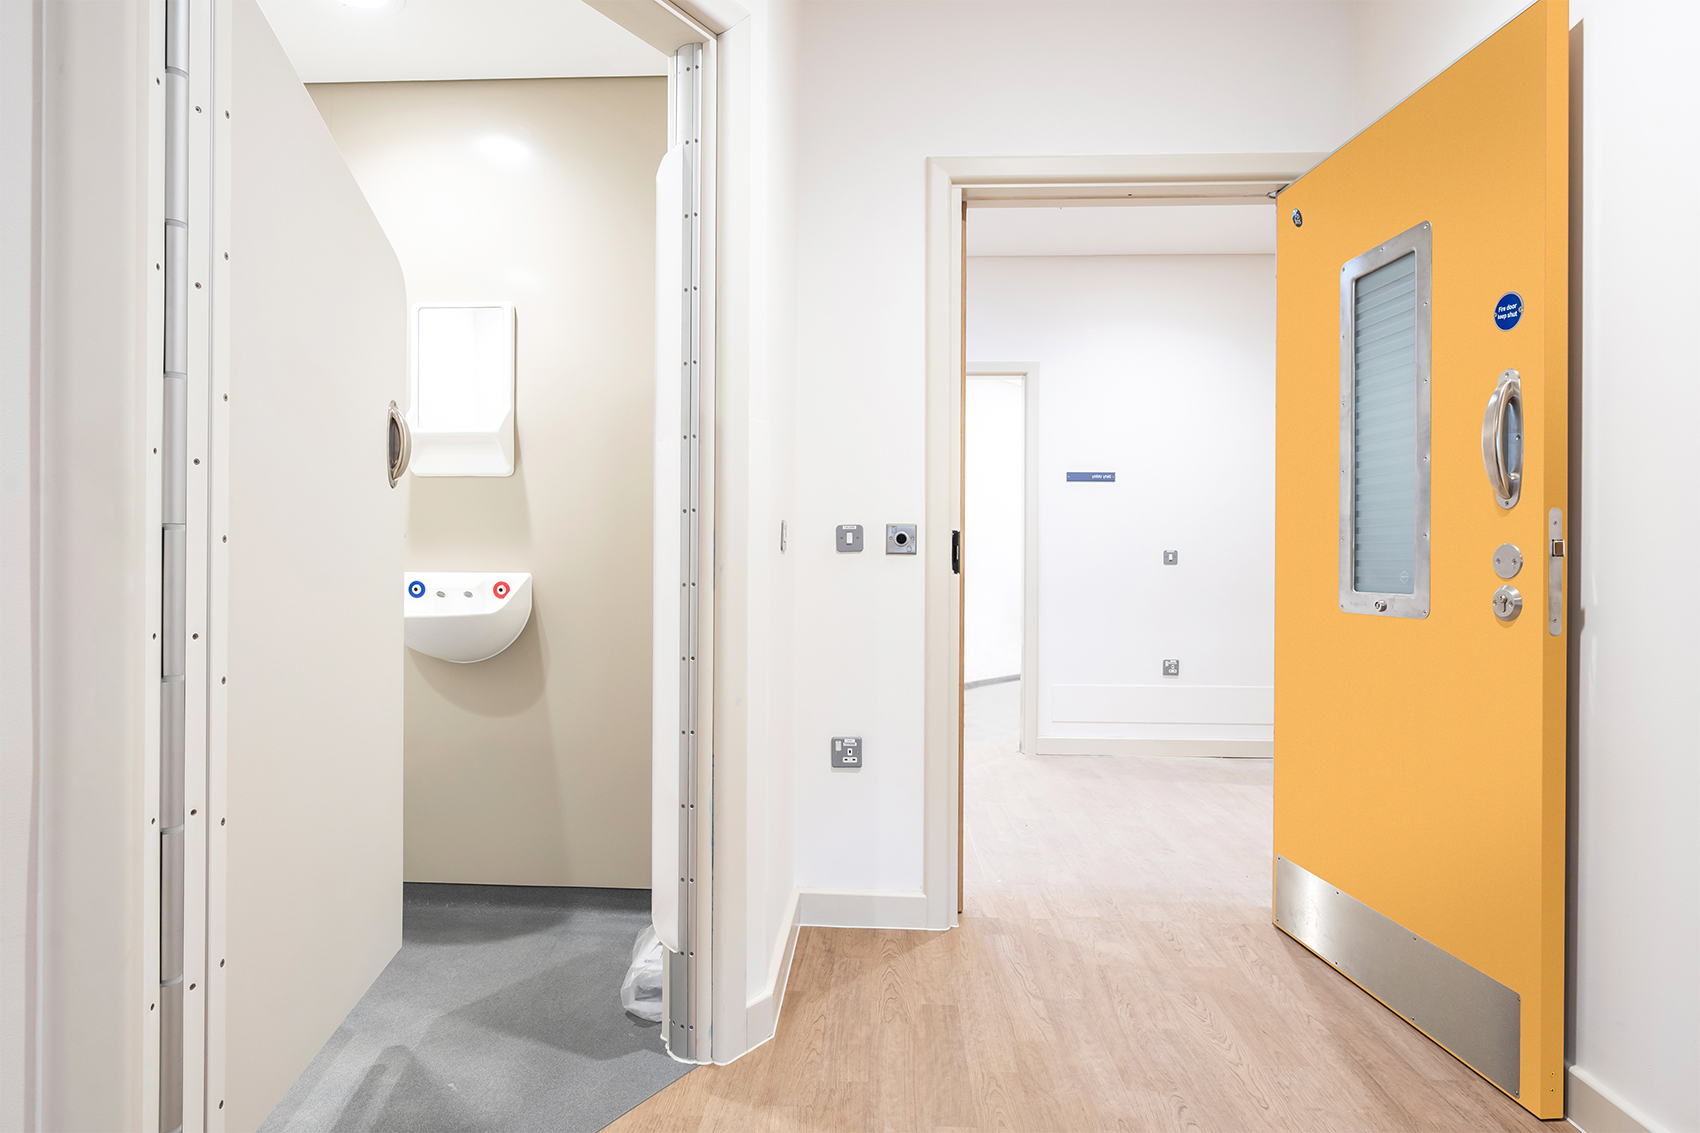 As experts in anti-ligature & anti-barricade design, Kingsway Group work to advance safety in challenging environments throughout the UK, including mental health, acute health, education, and prisons.